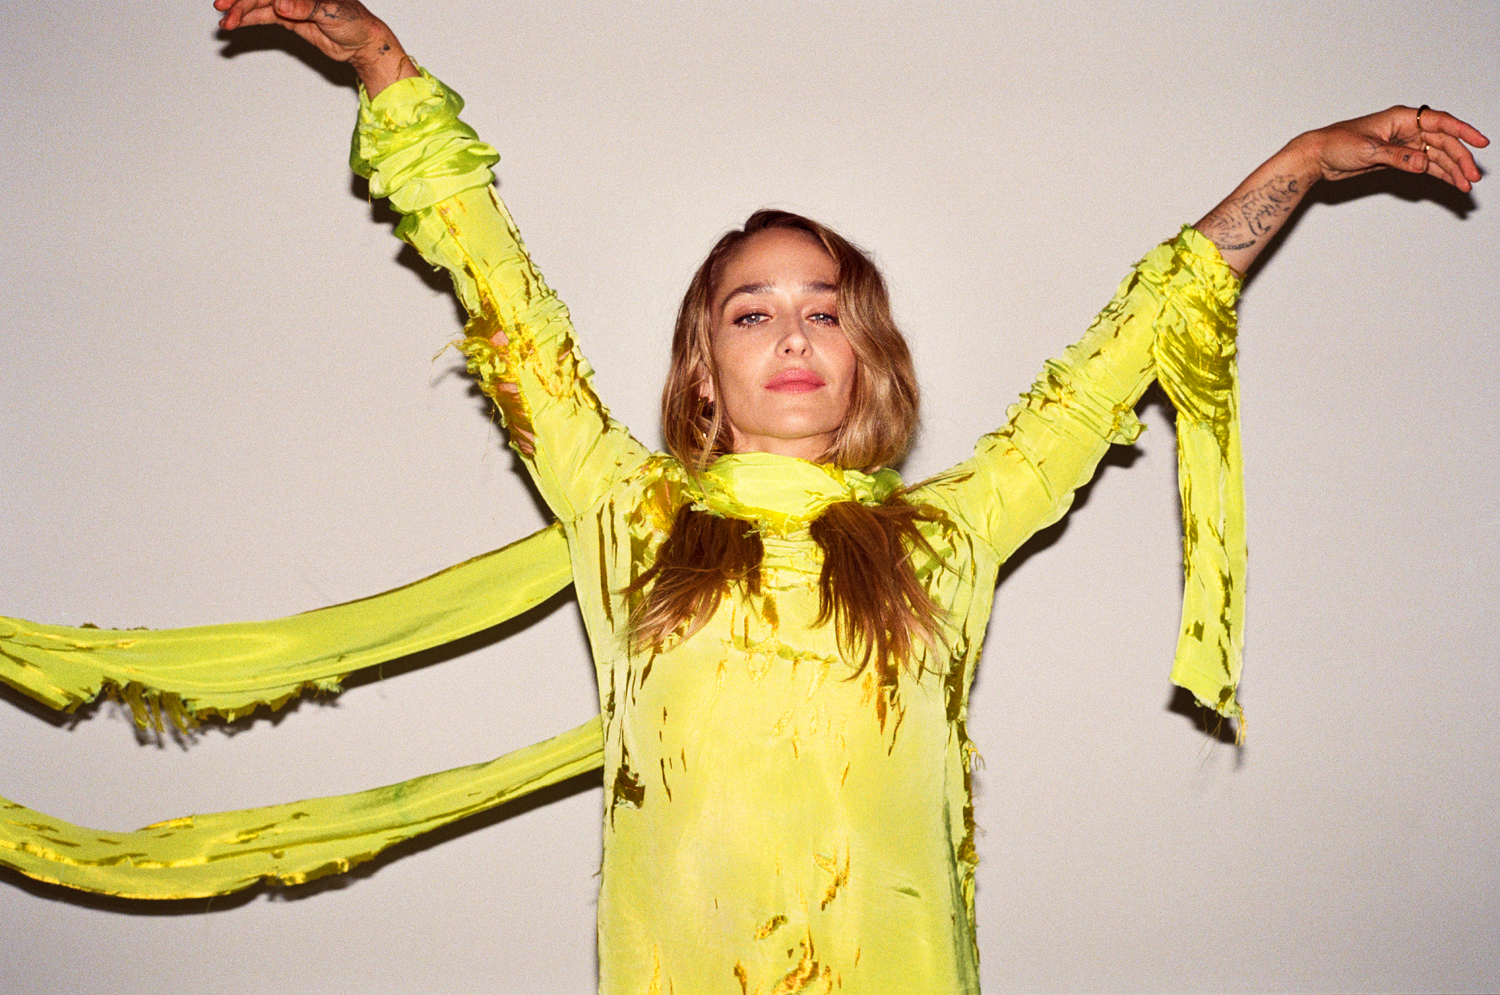 COVER STORY: JEMIMA KIRKE IN HER OWN WORDS